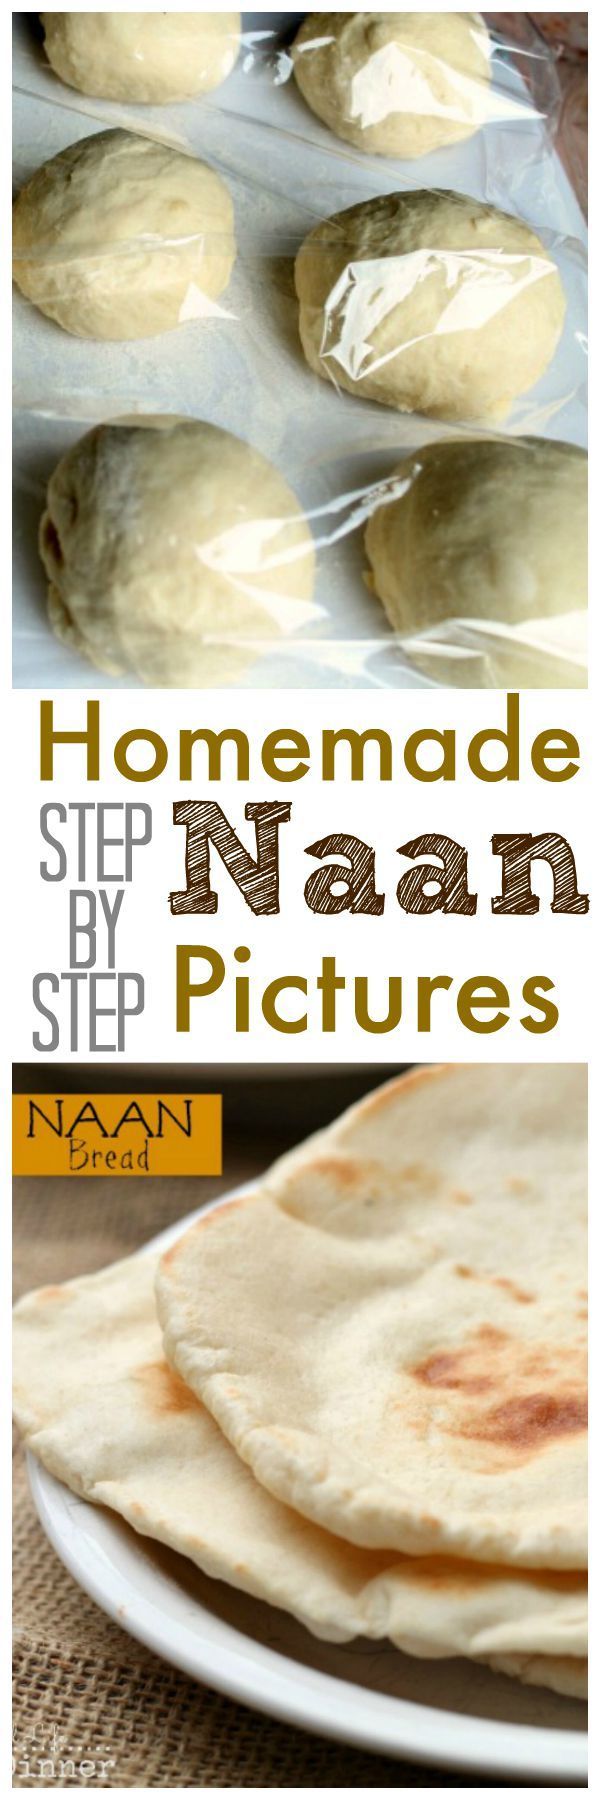 Making your own Naan isn’t as complicated as you think. This How to make Naan Bread Recipe with step by step pictures will have